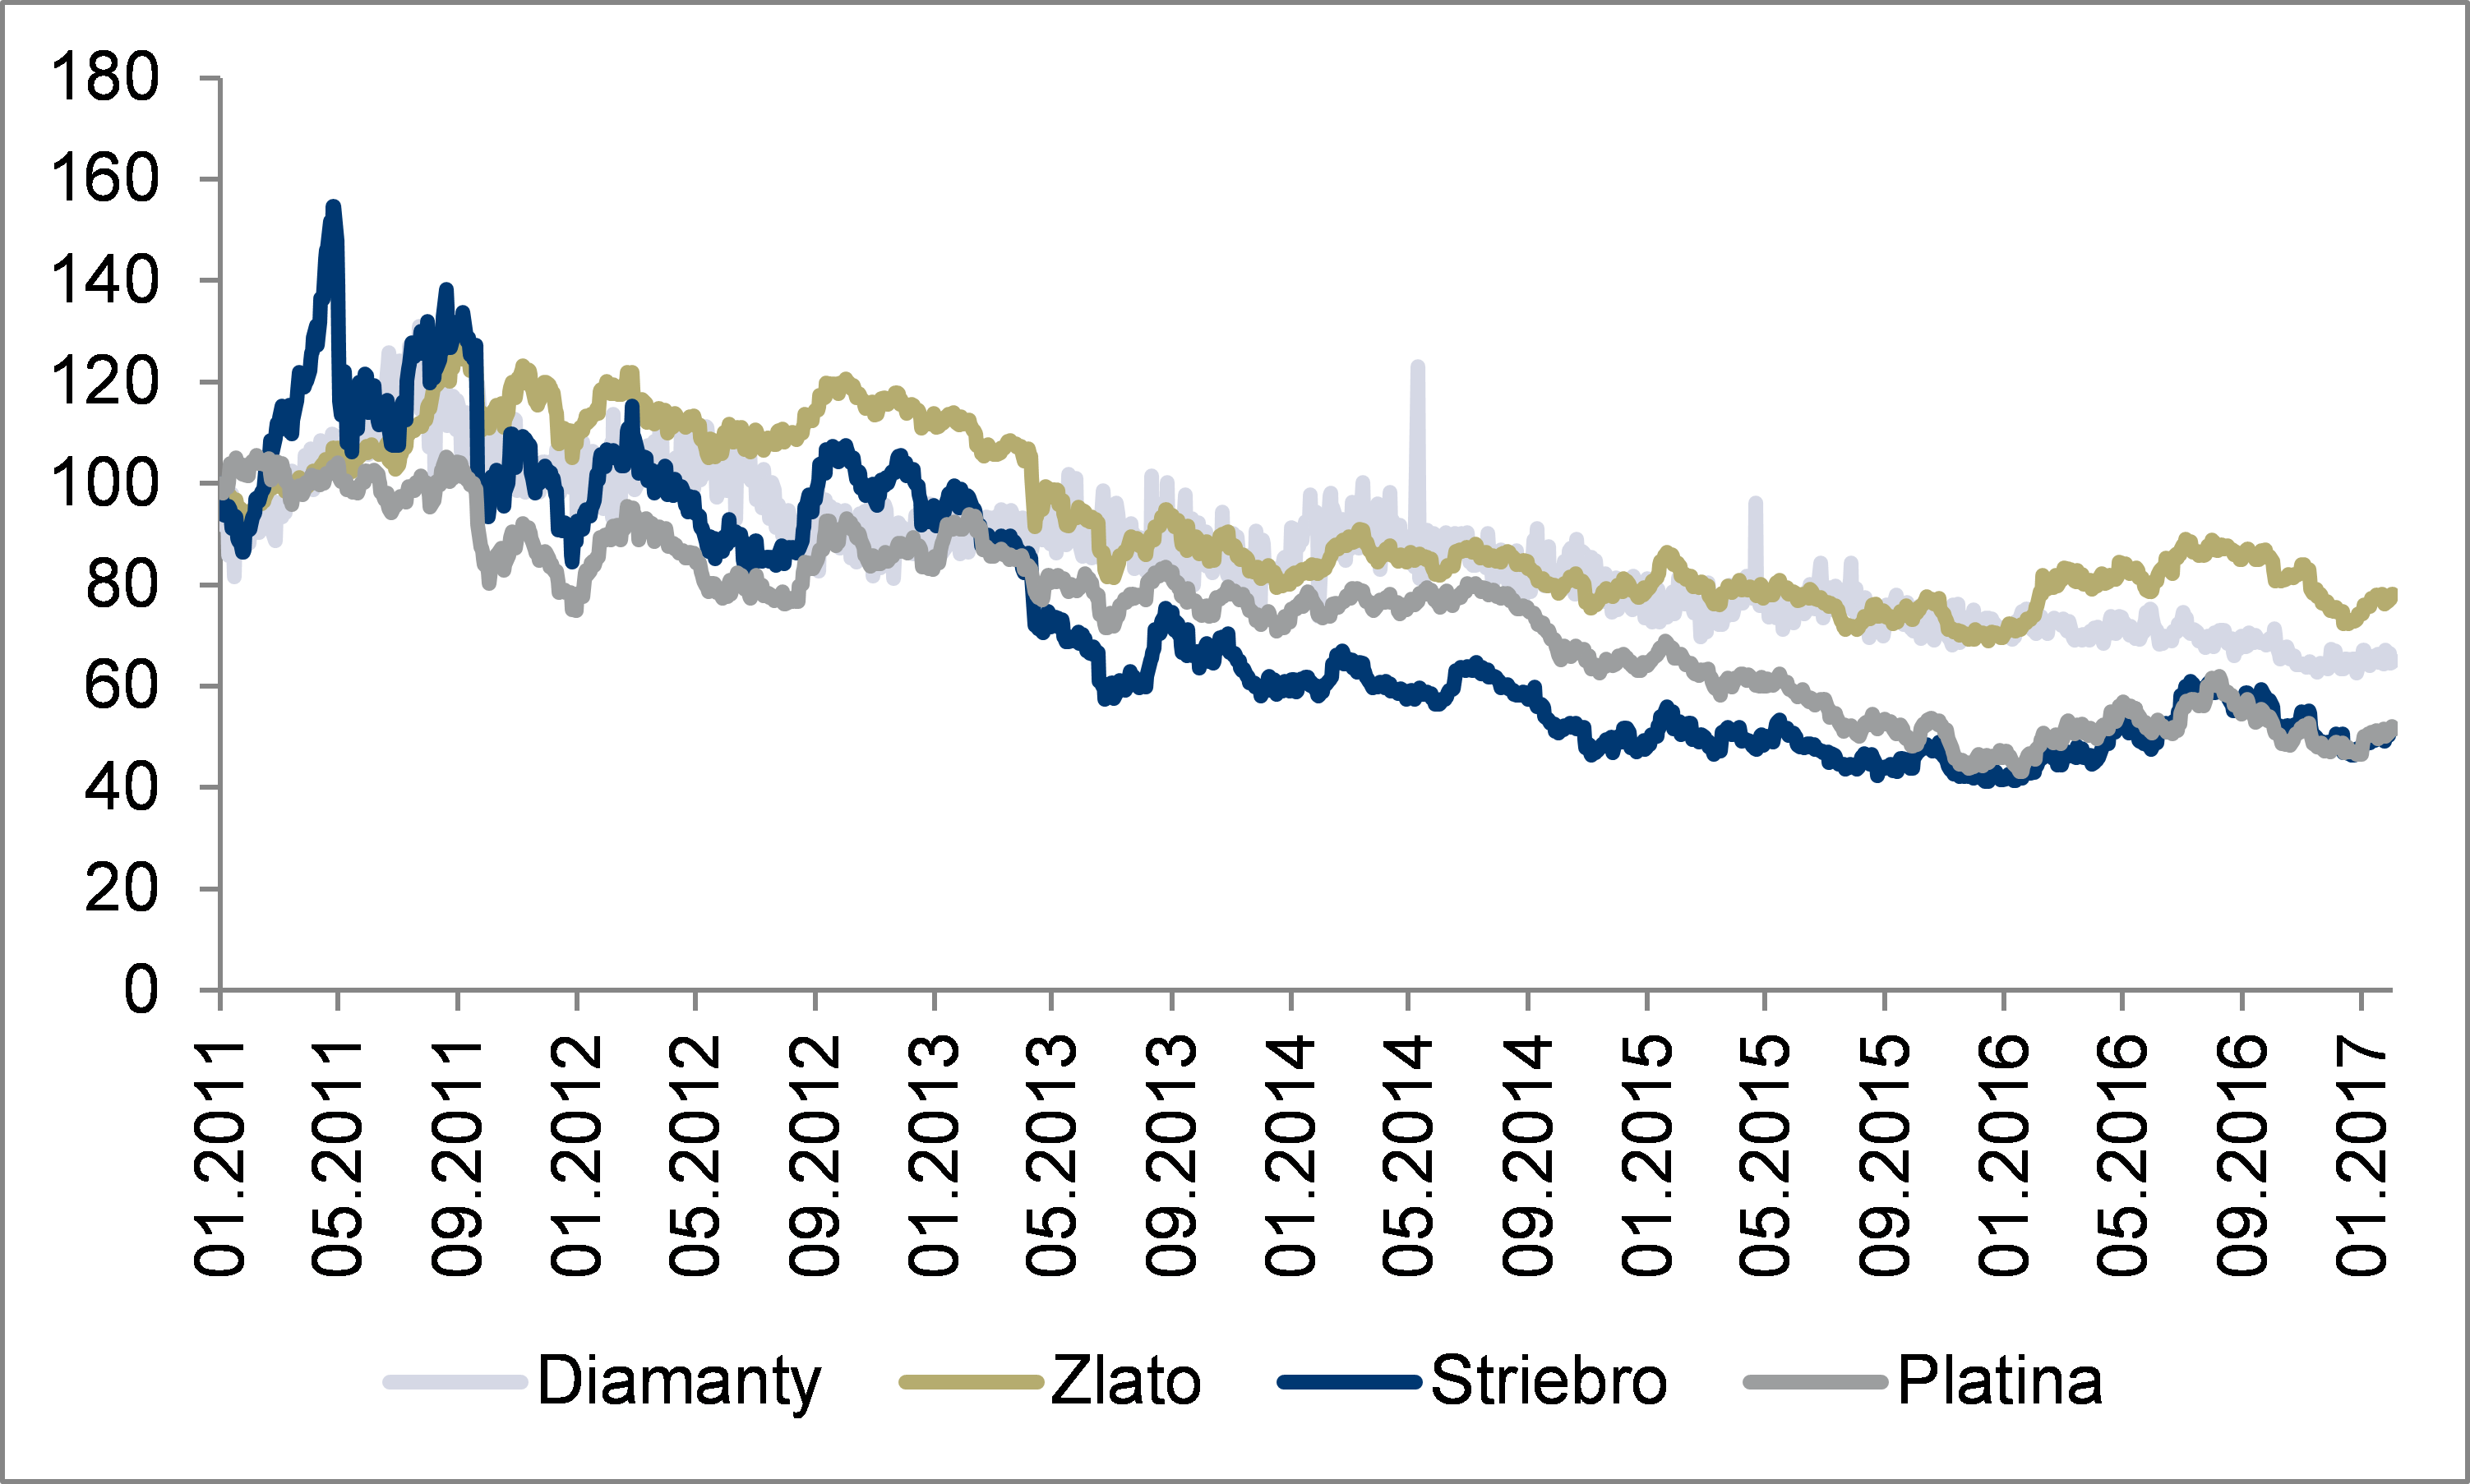 Real prices of diamonds, gold, silver and platinum, Index